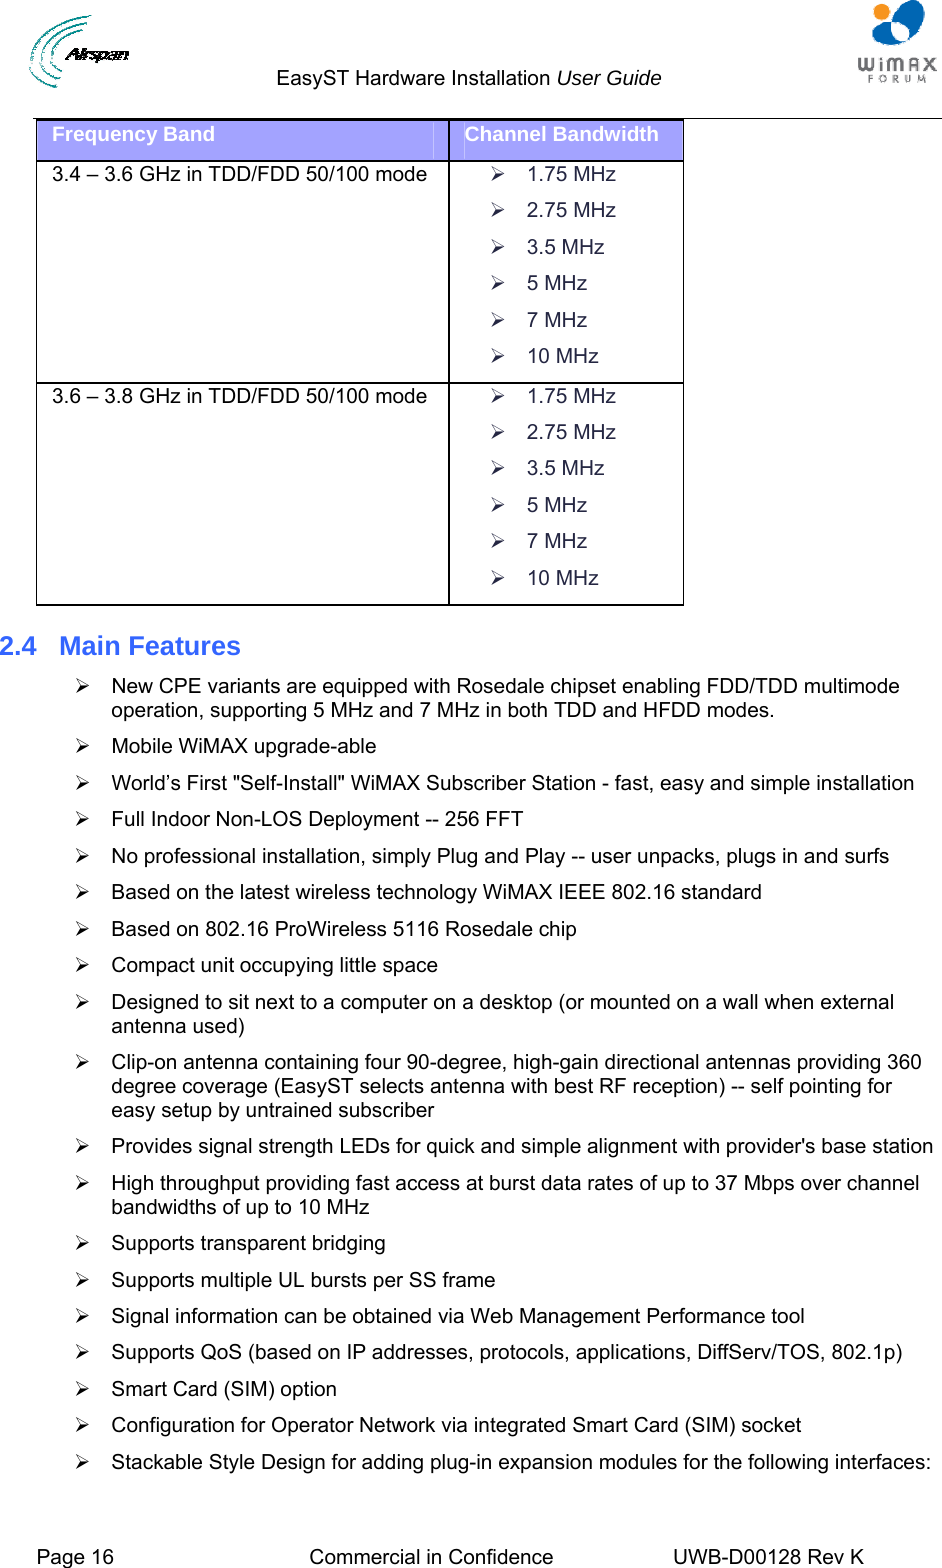                                  EasyST Hardware Installation User Guide     Page 16  Commercial in Confidence  UWB-D00128 Rev K   Frequency Band  Channel Bandwidth 3.4 – 3.6 GHz in TDD/FDD 50/100 mode  ¾ 1.75 MHz ¾ 2.75 MHz ¾ 3.5 MHz ¾ 5 MHz ¾ 7 MHz ¾ 10 MHz 3.6 – 3.8 GHz in TDD/FDD 50/100 mode  ¾ 1.75 MHz ¾ 2.75 MHz ¾ 3.5 MHz ¾ 5 MHz ¾ 7 MHz ¾ 10 MHz 2.4  Main Features ¾  New CPE variants are equipped with Rosedale chipset enabling FDD/TDD multimode operation, supporting 5 MHz and 7 MHz in both TDD and HFDD modes. ¾  Mobile WiMAX upgrade-able ¾  World’s First &quot;Self-Install&quot; WiMAX Subscriber Station - fast, easy and simple installation ¾  Full Indoor Non-LOS Deployment -- 256 FFT ¾  No professional installation, simply Plug and Play -- user unpacks, plugs in and surfs ¾  Based on the latest wireless technology WiMAX IEEE 802.16 standard ¾  Based on 802.16 ProWireless 5116 Rosedale chip  ¾  Compact unit occupying little space ¾  Designed to sit next to a computer on a desktop (or mounted on a wall when external antenna used) ¾  Clip-on antenna containing four 90-degree, high-gain directional antennas providing 360 degree coverage (EasyST selects antenna with best RF reception) -- self pointing for easy setup by untrained subscriber ¾  Provides signal strength LEDs for quick and simple alignment with provider&apos;s base station ¾  High throughput providing fast access at burst data rates of up to 37 Mbps over channel bandwidths of up to 10 MHz ¾  Supports transparent bridging ¾  Supports multiple UL bursts per SS frame ¾  Signal information can be obtained via Web Management Performance tool ¾  Supports QoS (based on IP addresses, protocols, applications, DiffServ/TOS, 802.1p) ¾  Smart Card (SIM) option ¾  Configuration for Operator Network via integrated Smart Card (SIM) socket ¾  Stackable Style Design for adding plug-in expansion modules for the following interfaces: 